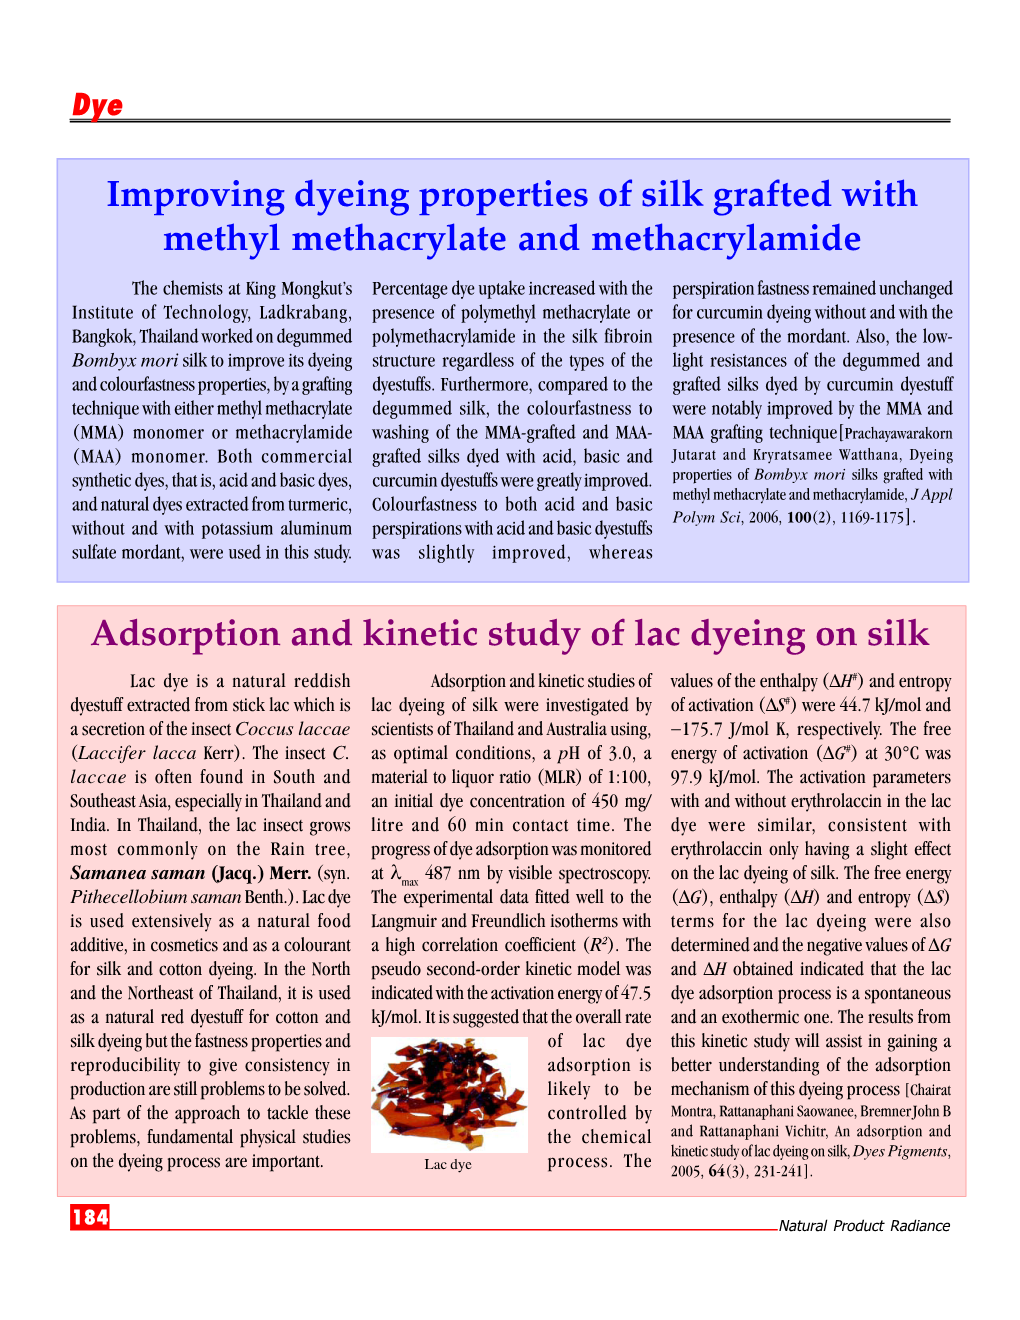 Adsorption and Kinetic Study of Lac Dyeing on Silk Improving Dyeing